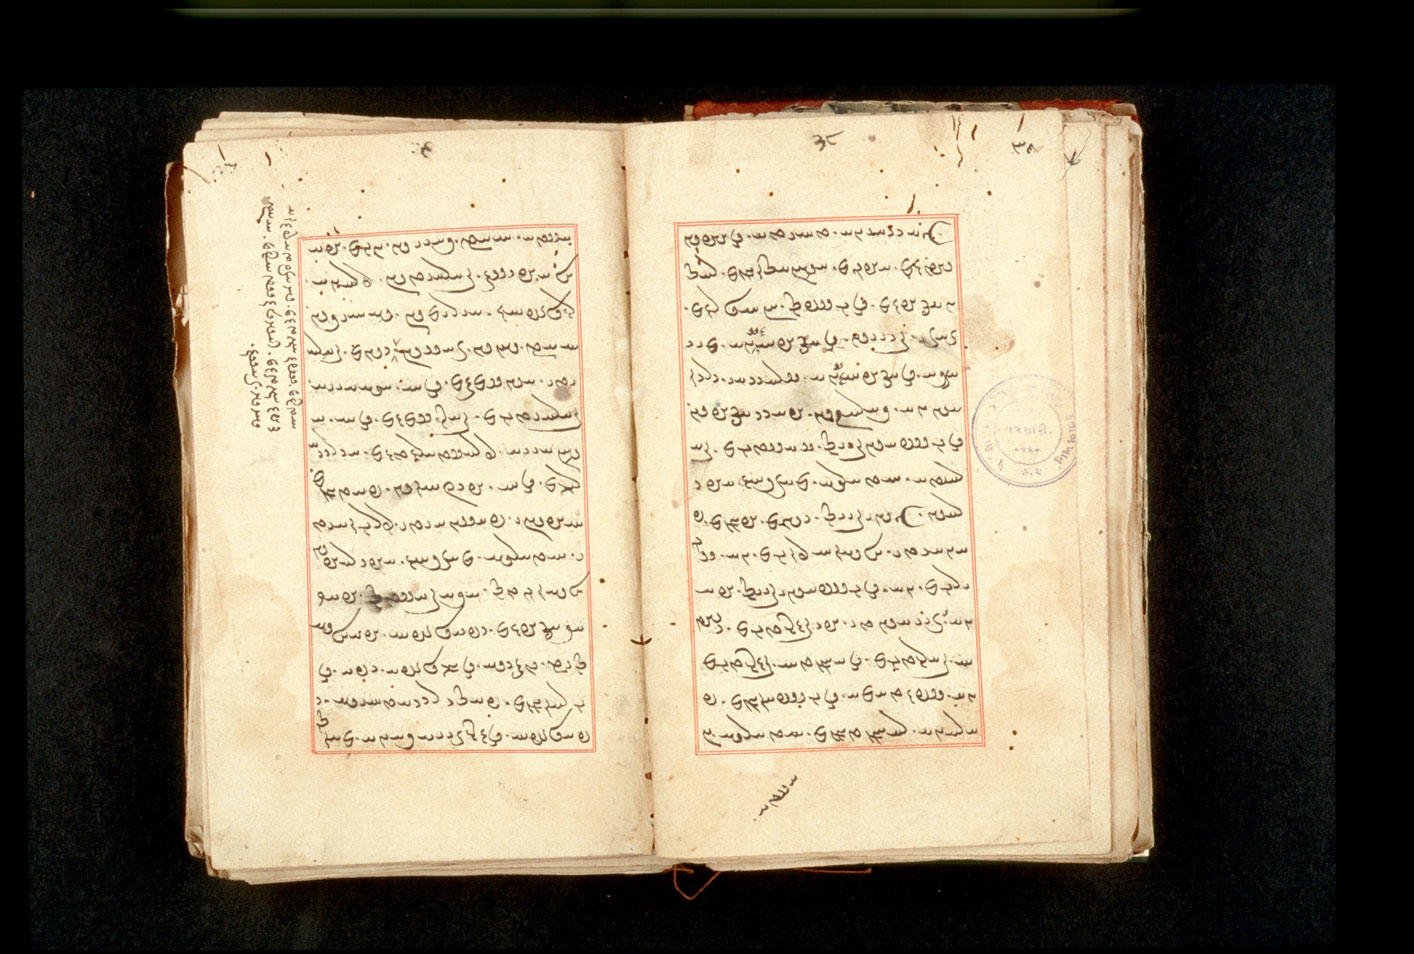 Folios 38v (right) and 39r (left)